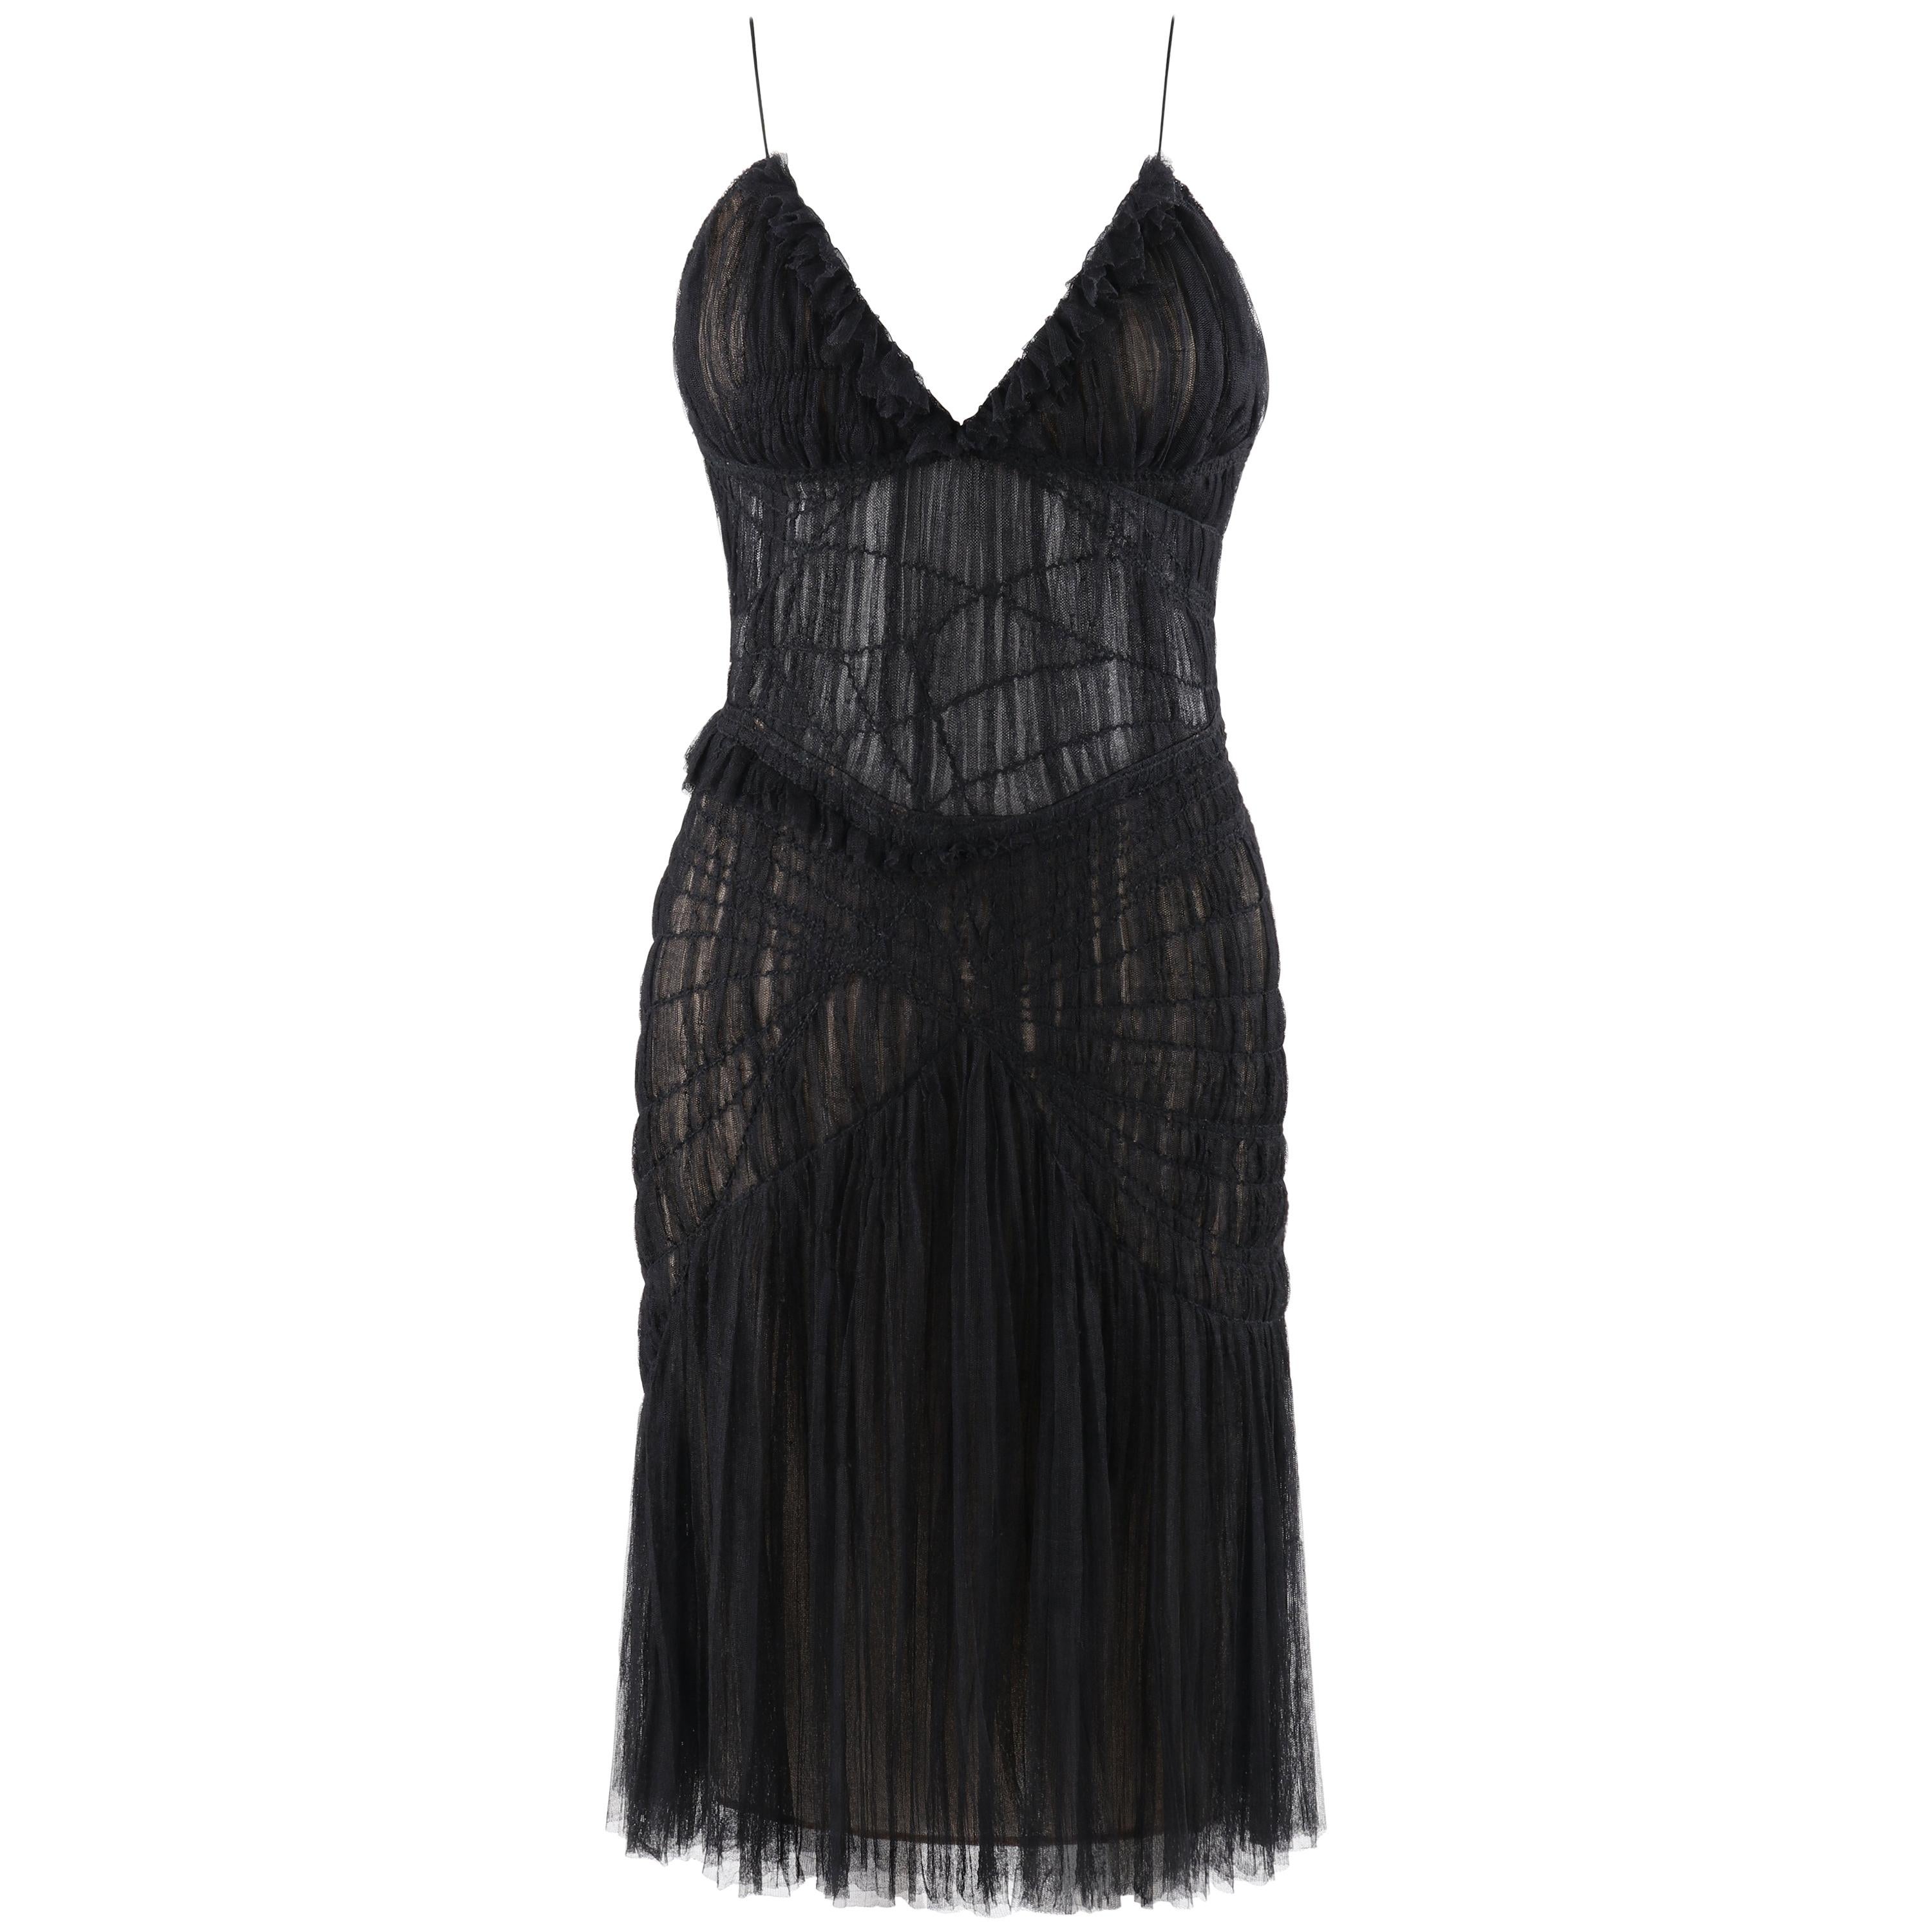 ALEXANDER McQUEEN S/S 2003 “Irere” Black Gathered Layer Tulle Mesh V Neck Dress For Sale